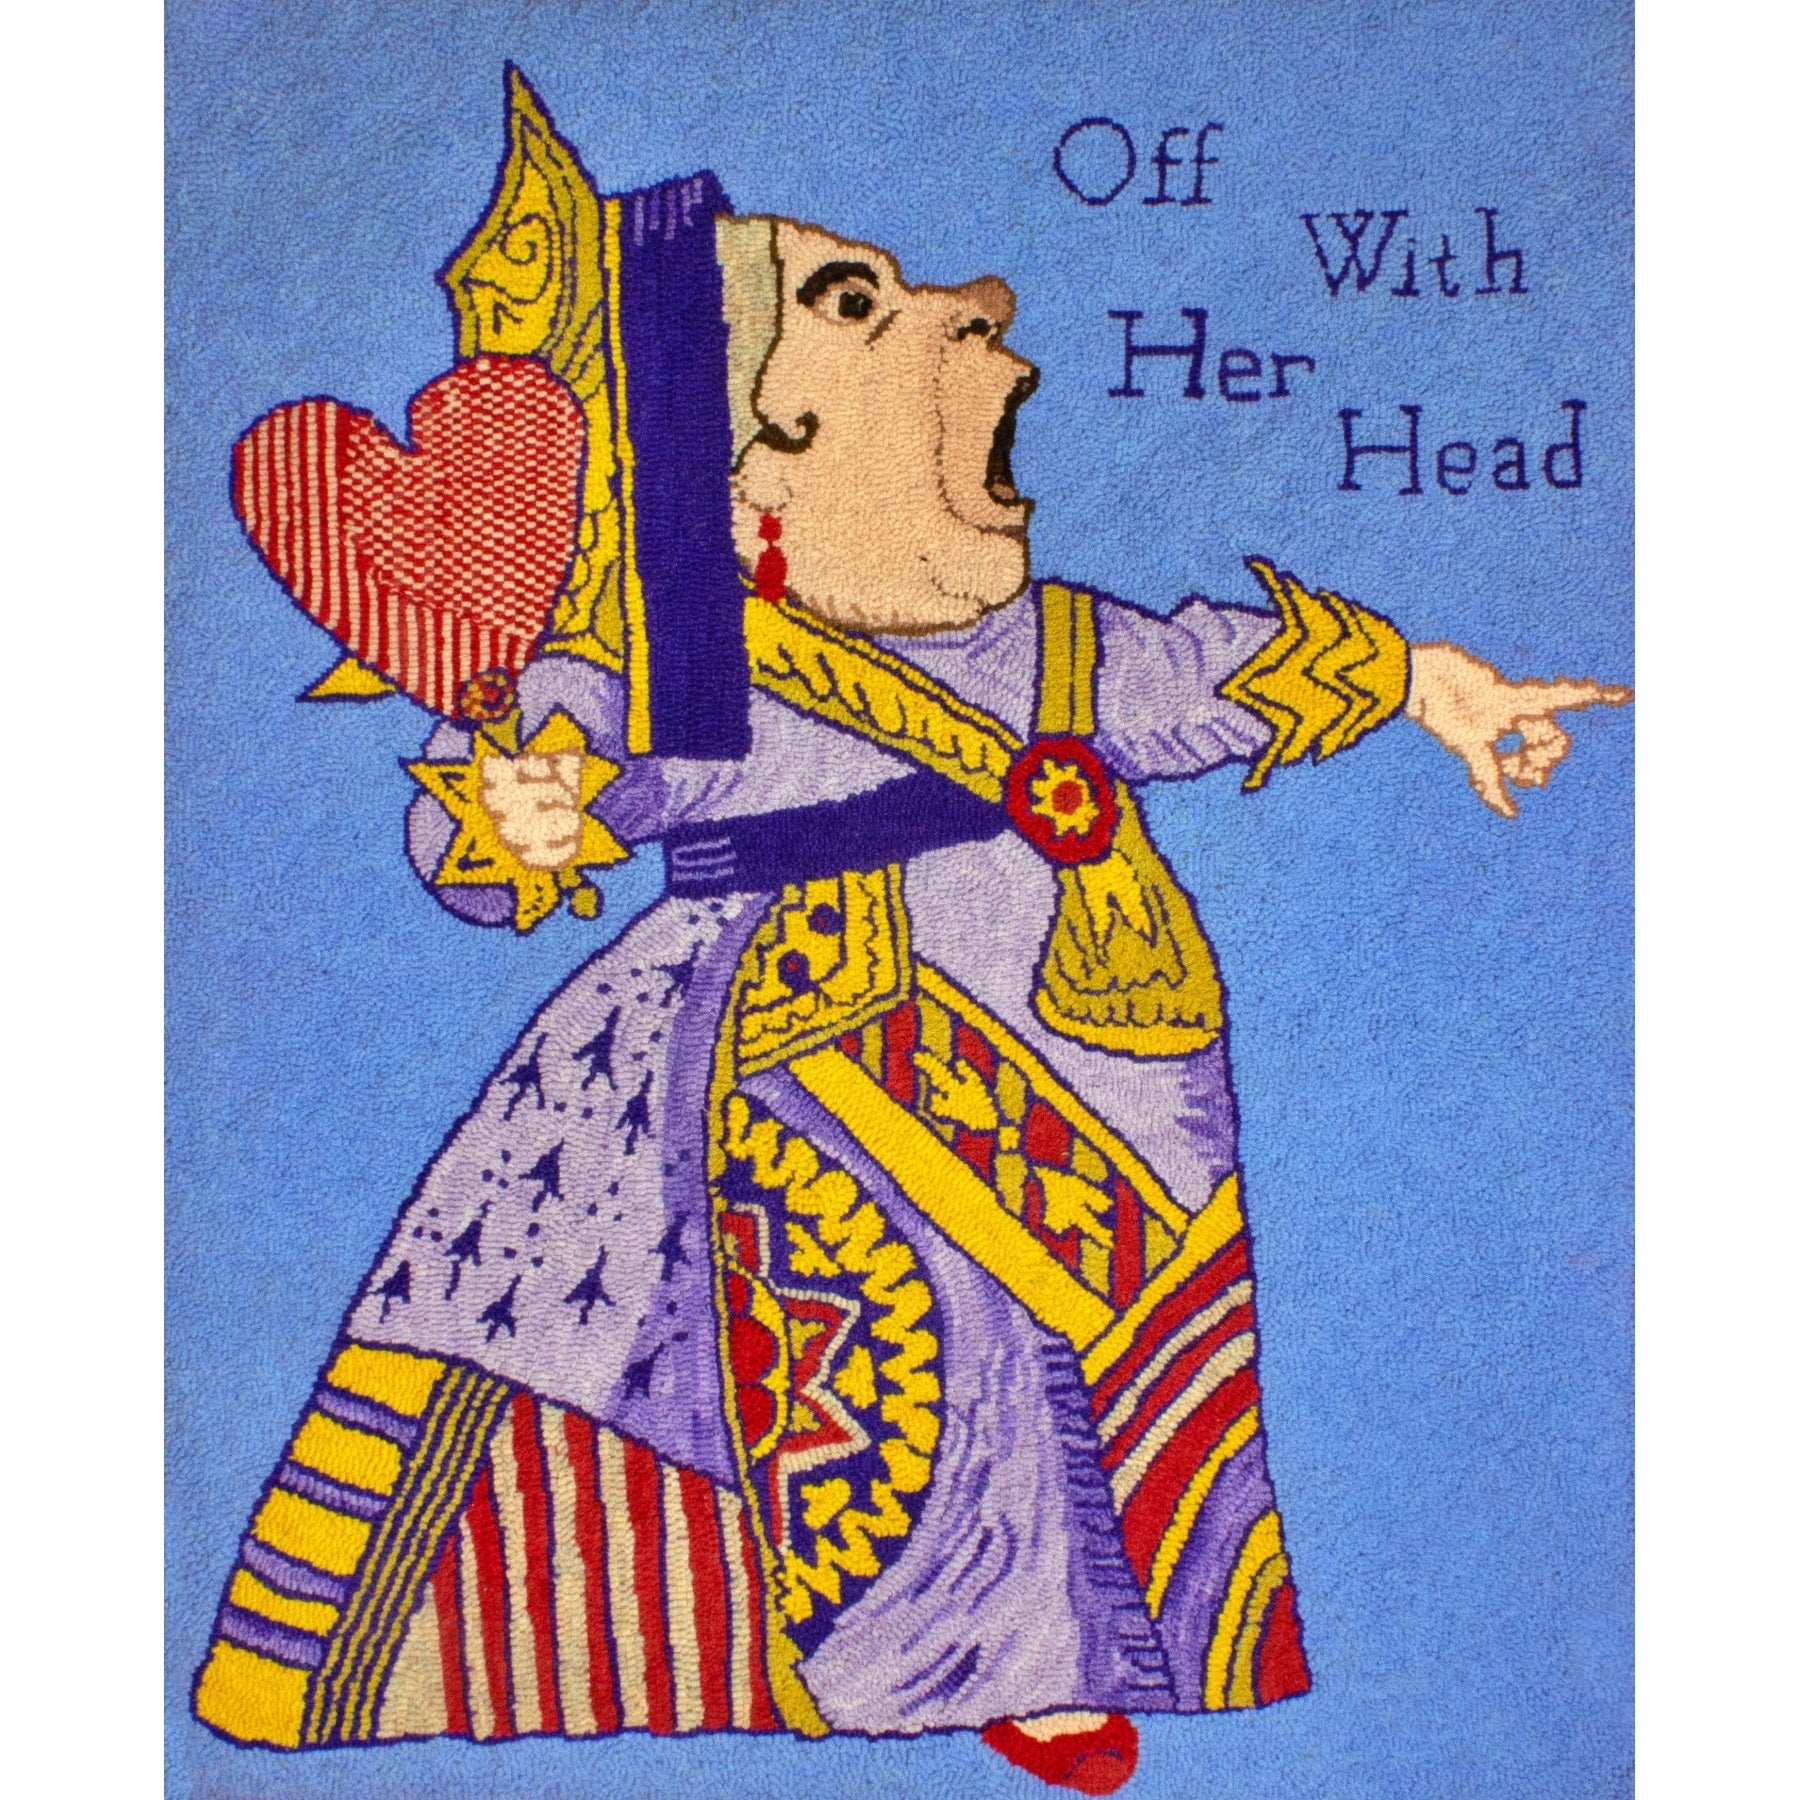 Queen of Hearts, ill. John Tenniel, 1866, rug hooked by Carolyn Phipps